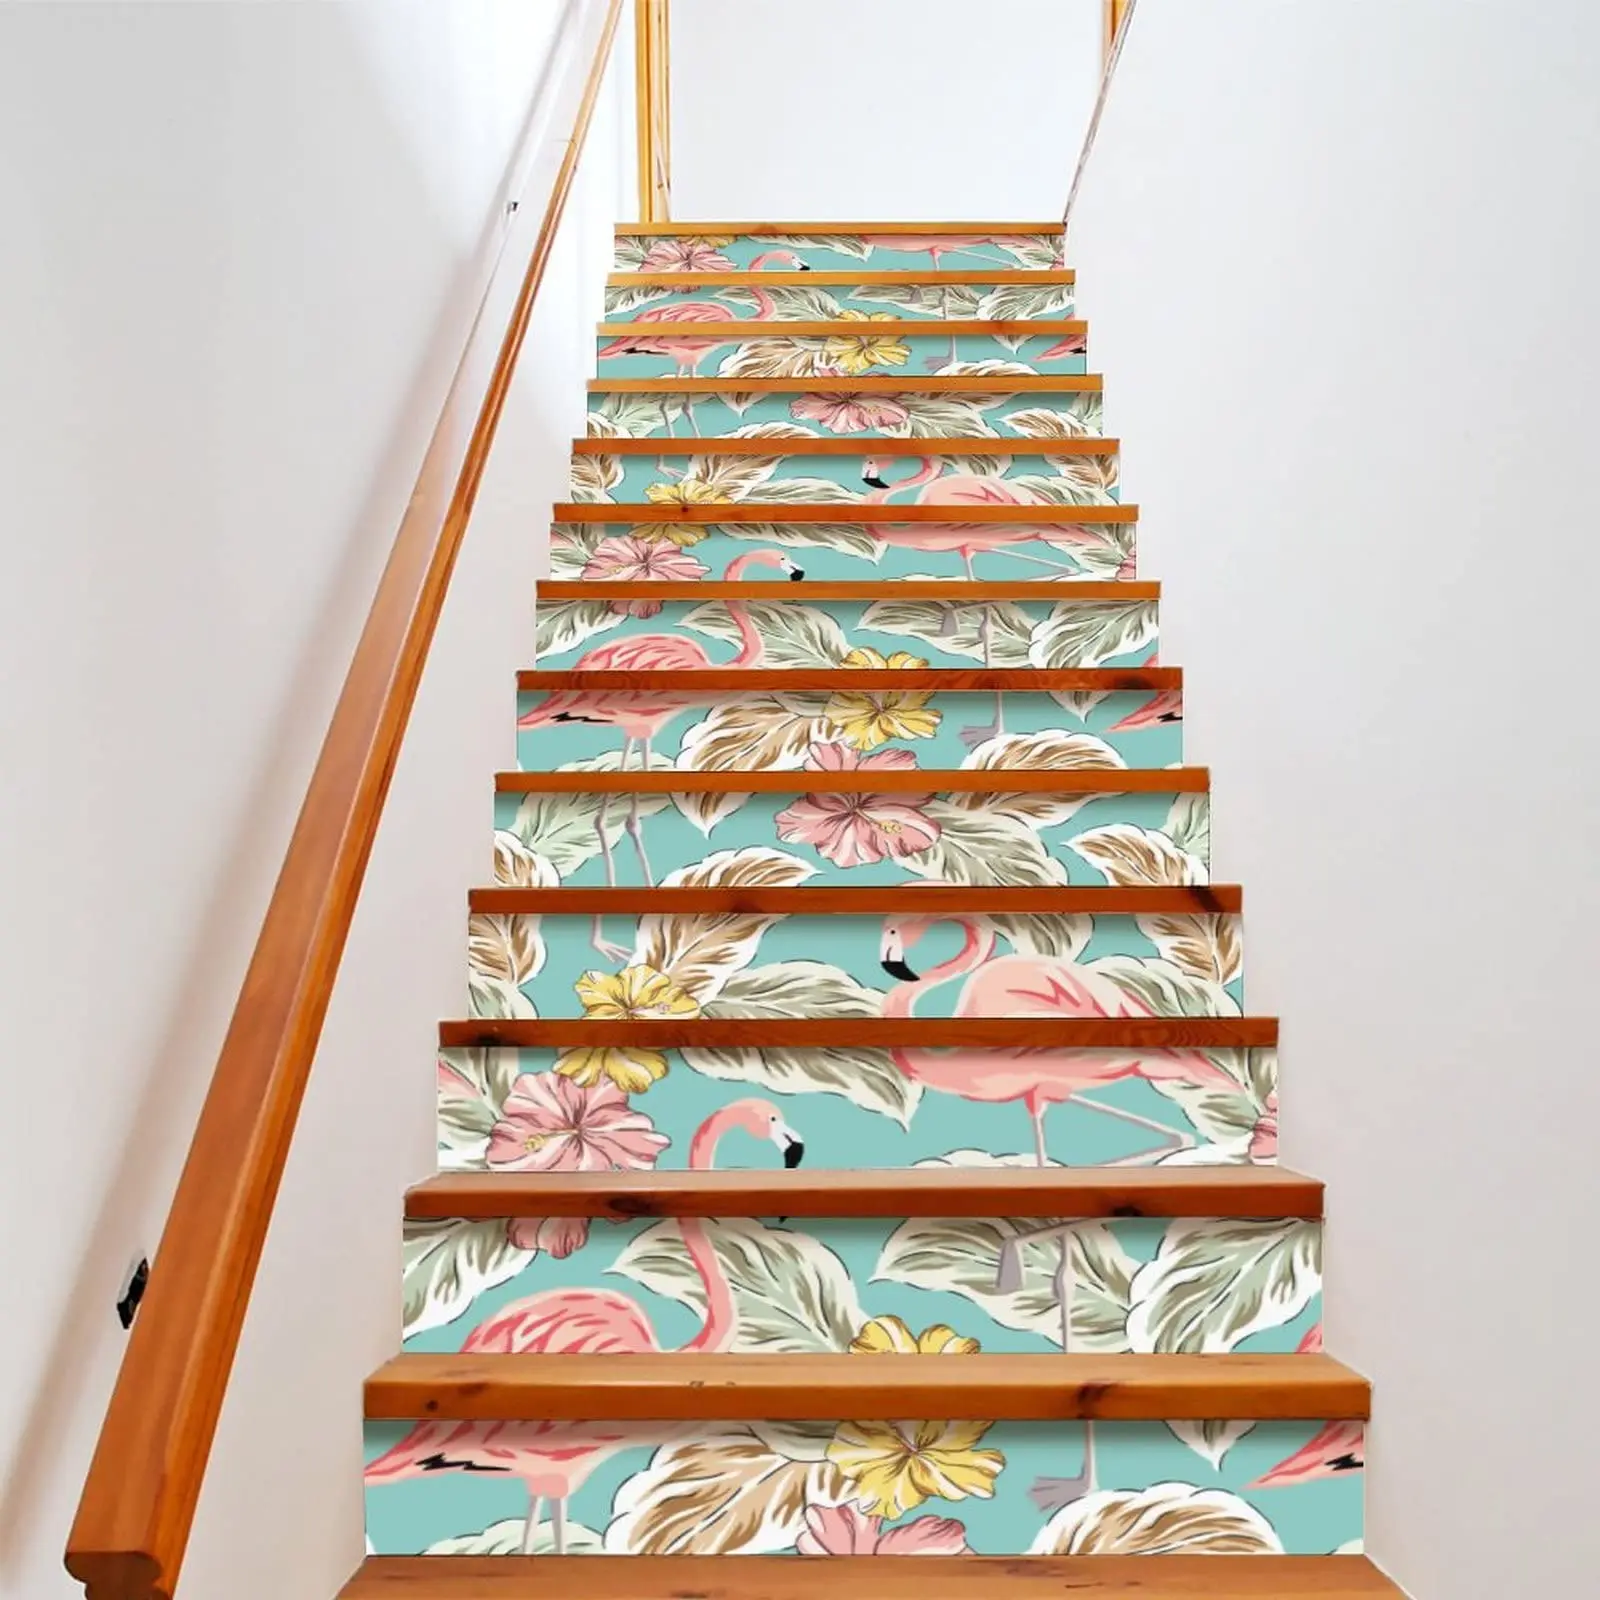 

Pink Flamingo Stair Stickers Romantic Animal Staircase Sticker Decals Tropical Birds Leaves Stairs Risers Stairway Decor Murals